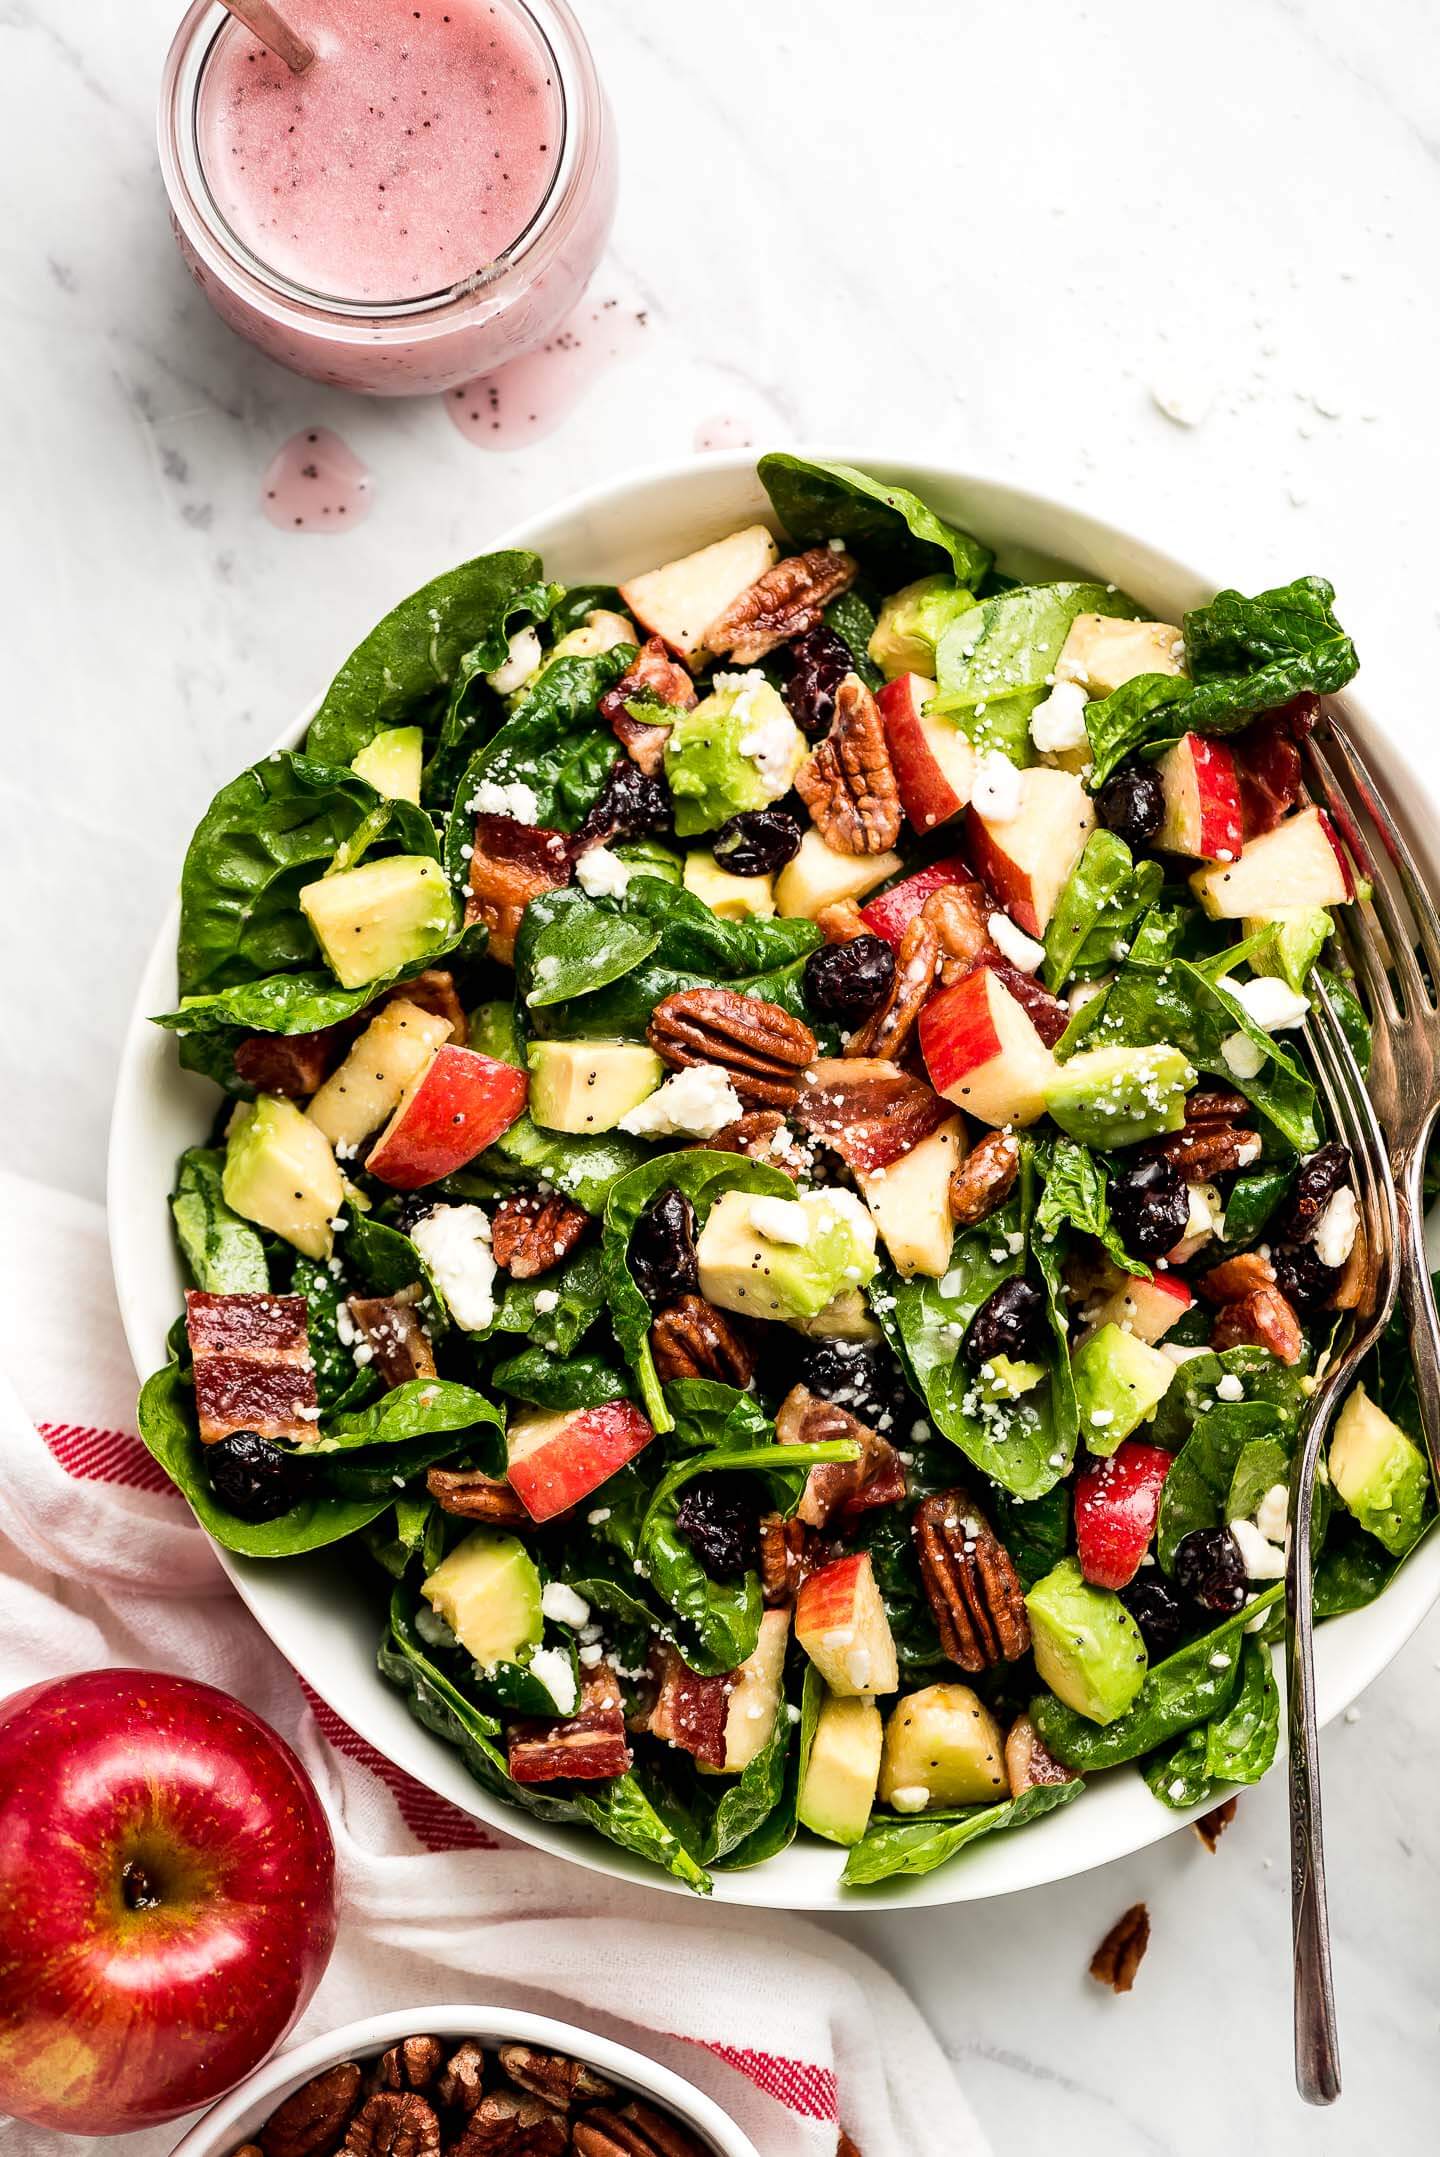 Apple & Bacon Spinach Salad tossed in a poppy seed dressing in a large bowl with an apple and a jar of pink poppy seed dressing to the side.